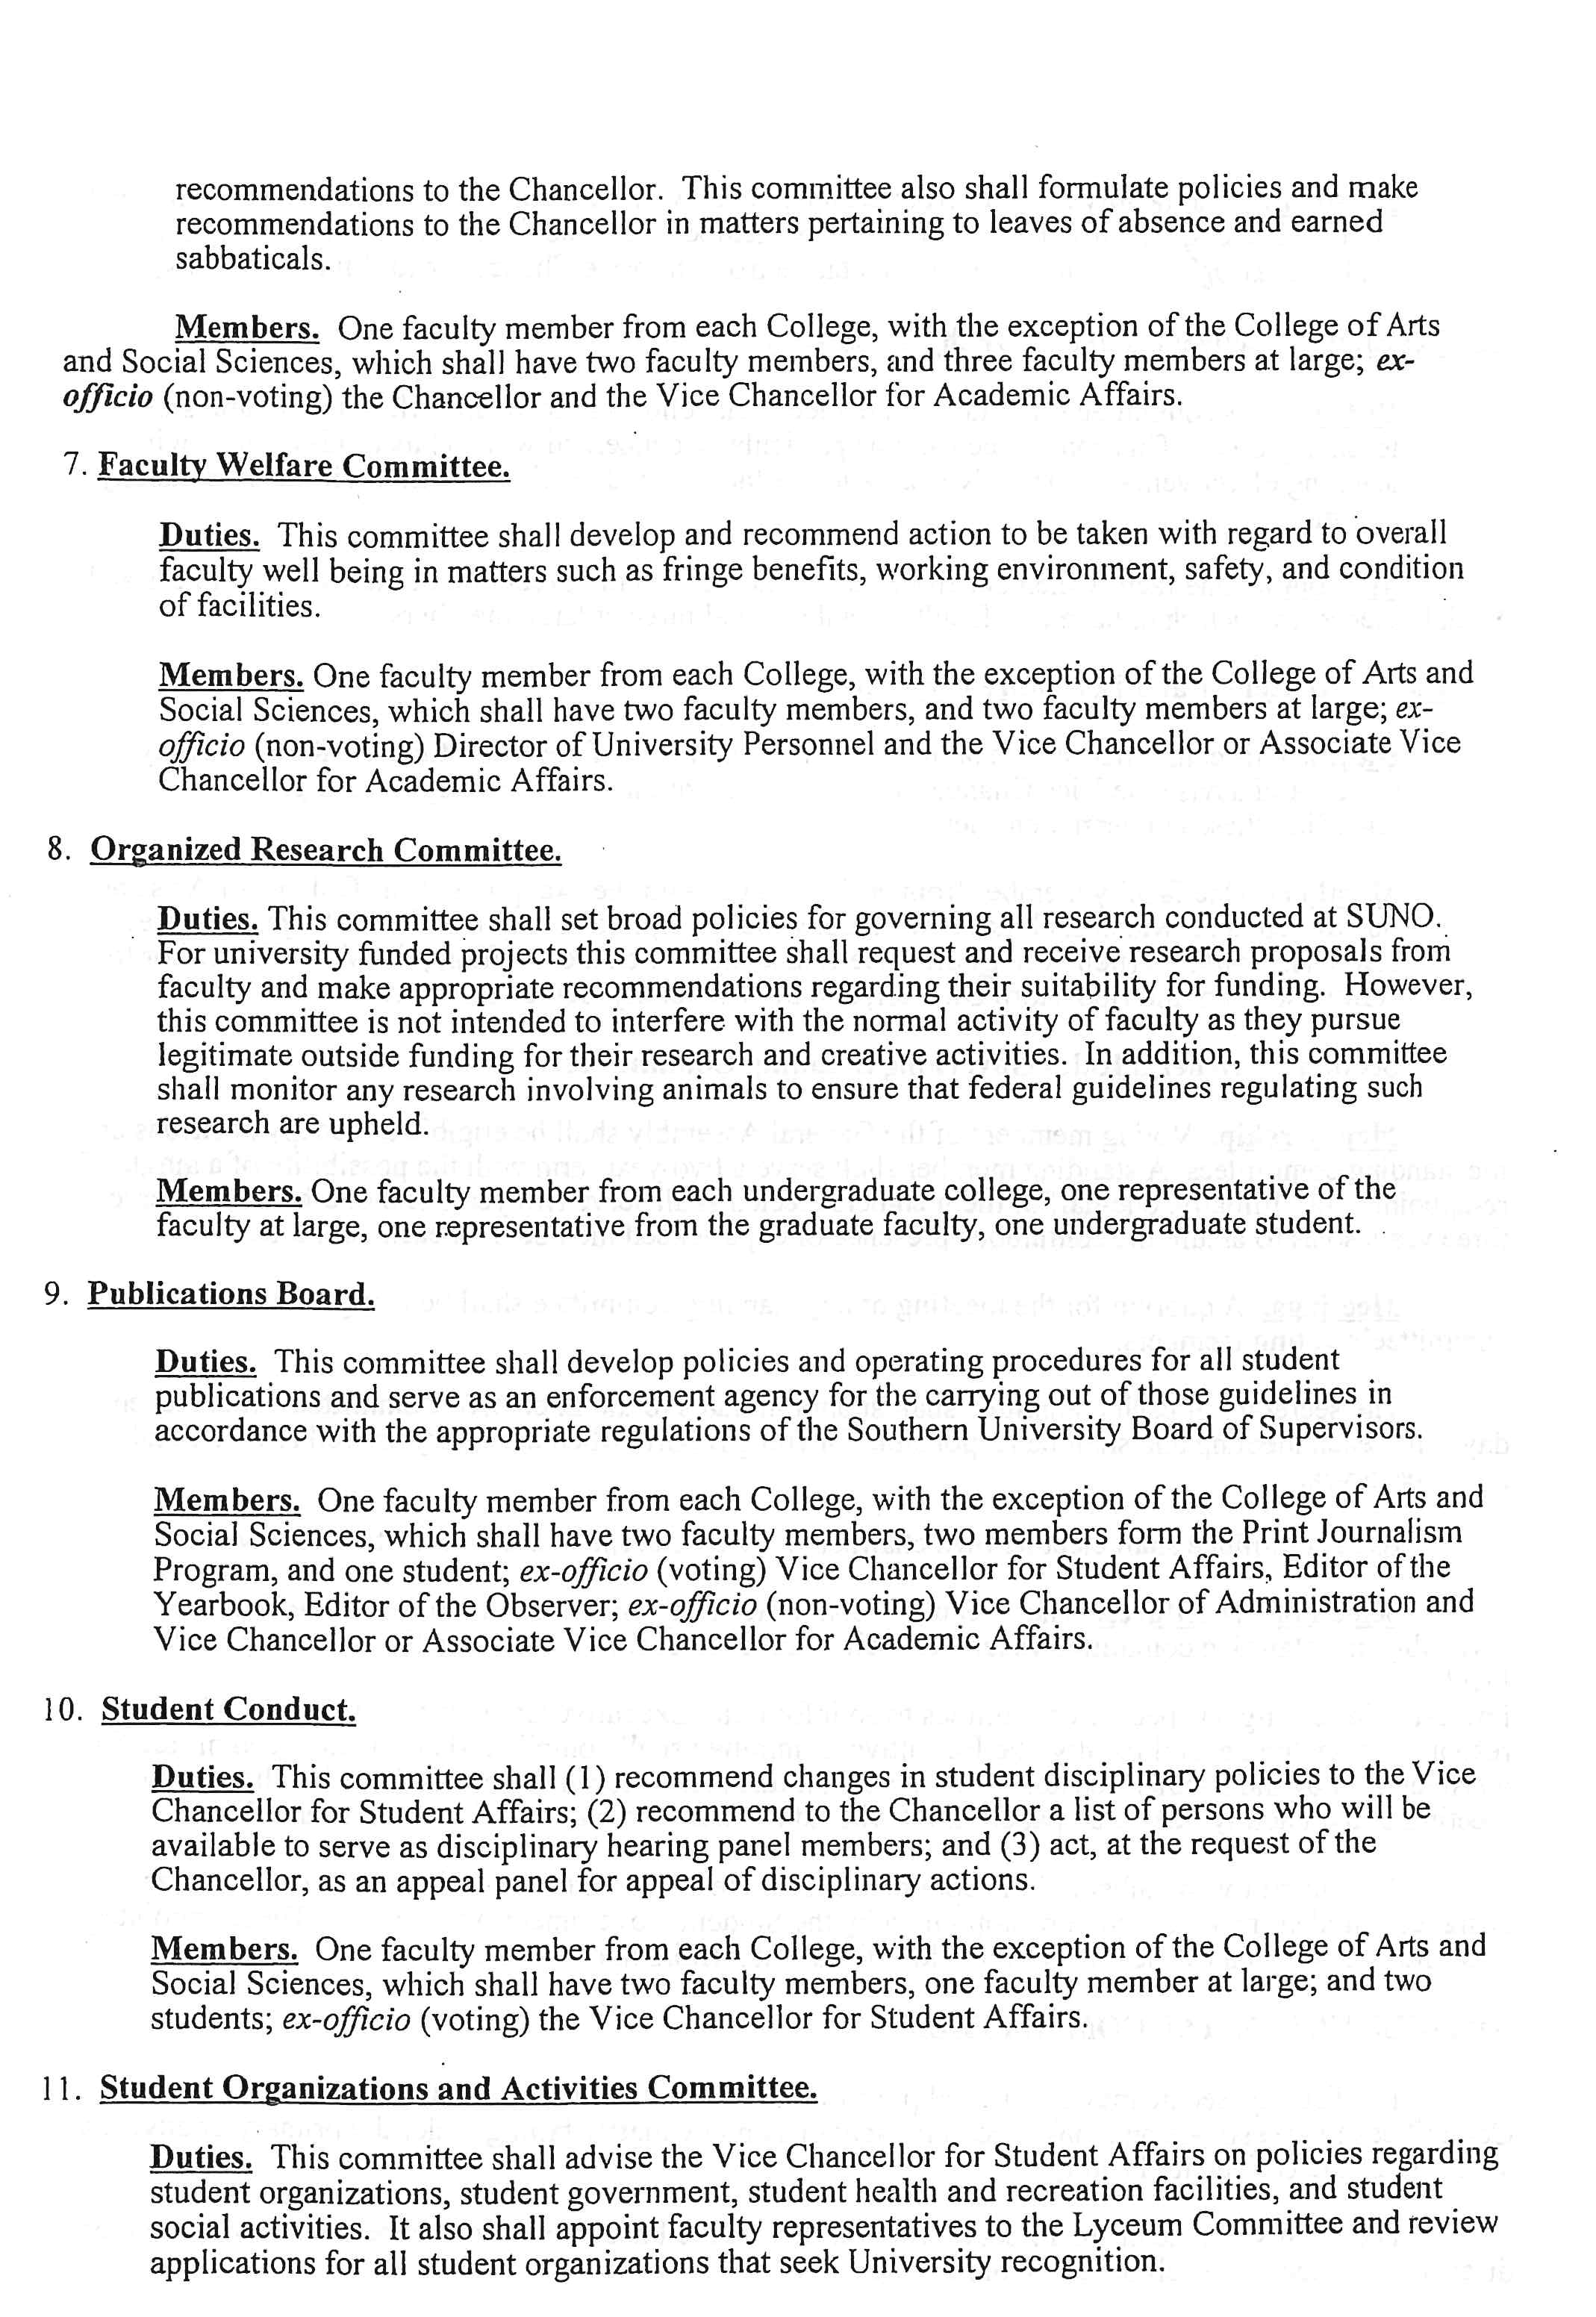 Constitution and Bylaws - Page 7